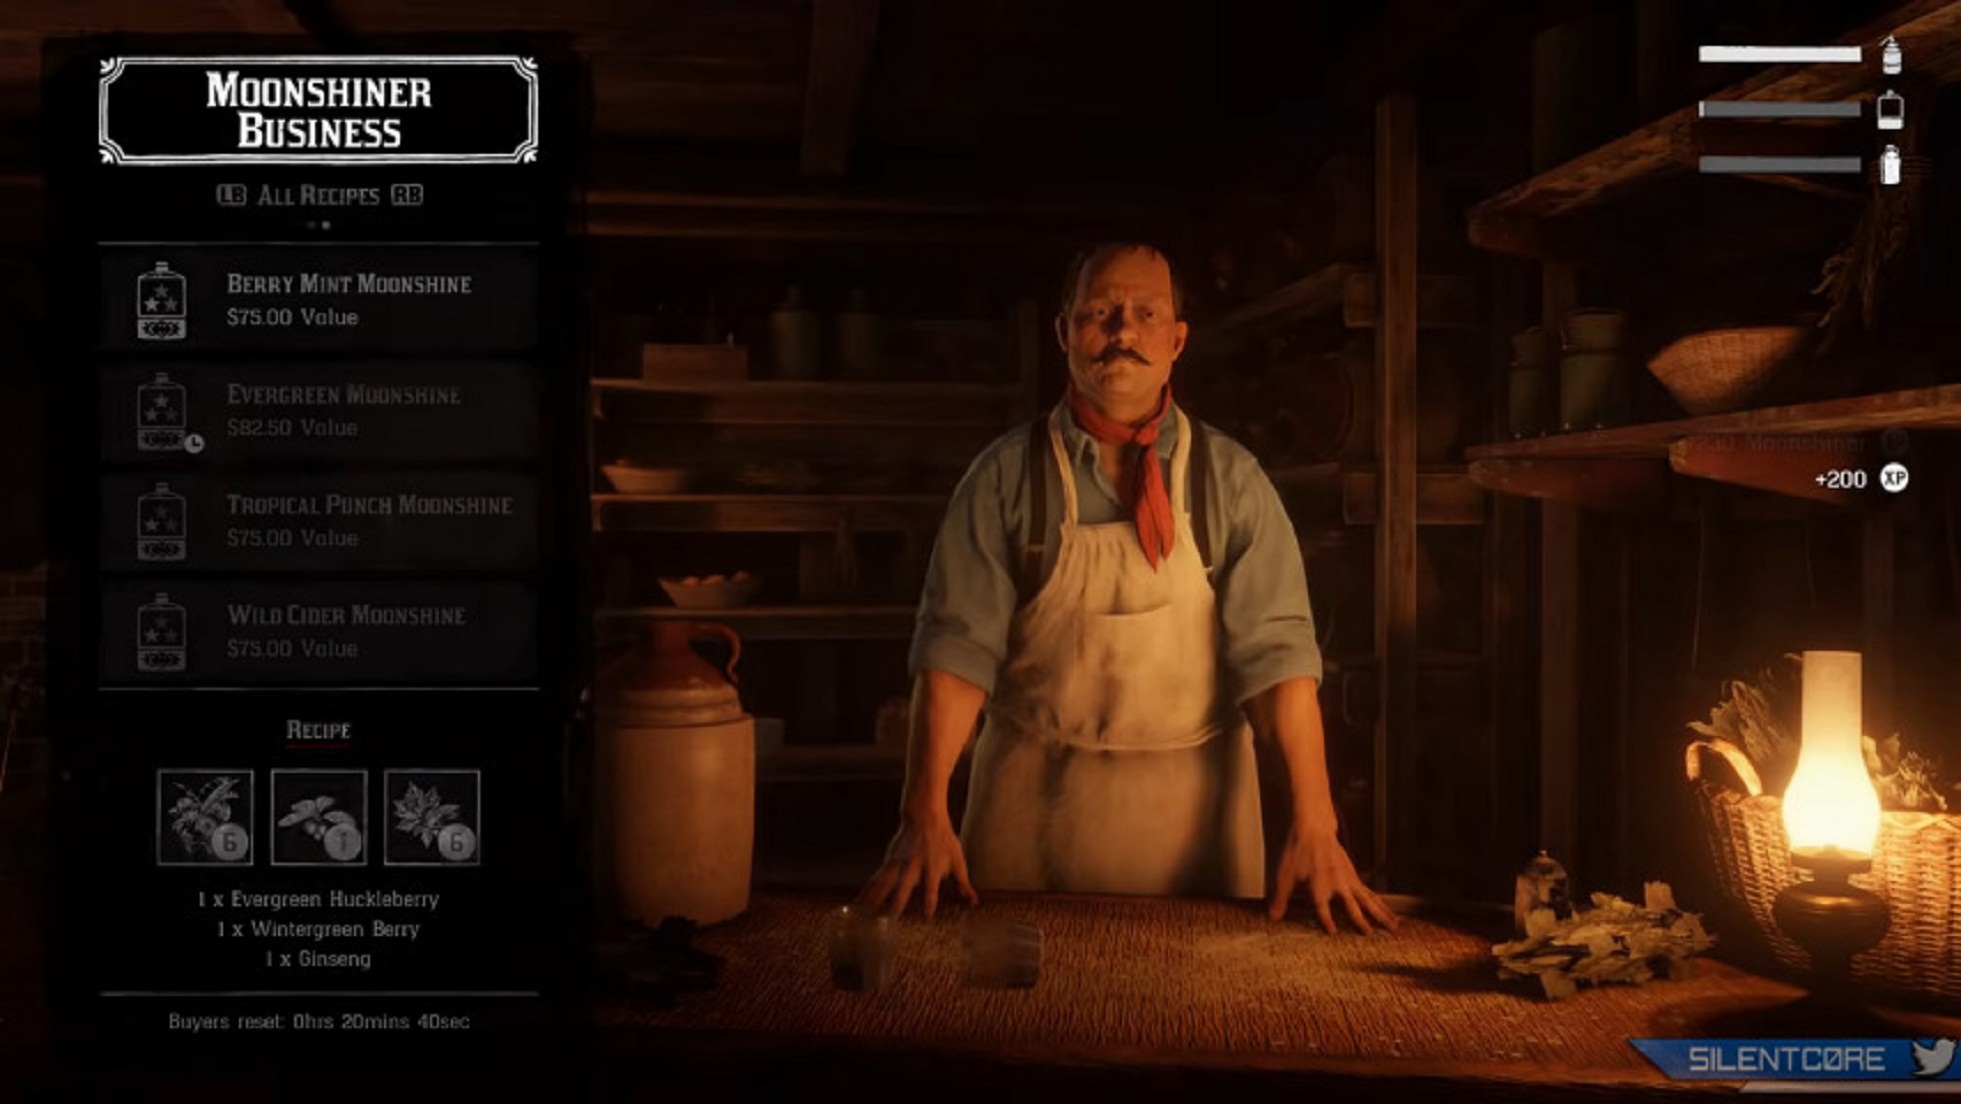 The New Red Dead Online Content ‘Moonshiner Role’ Has Been A Big Improvement Over Previous Roles